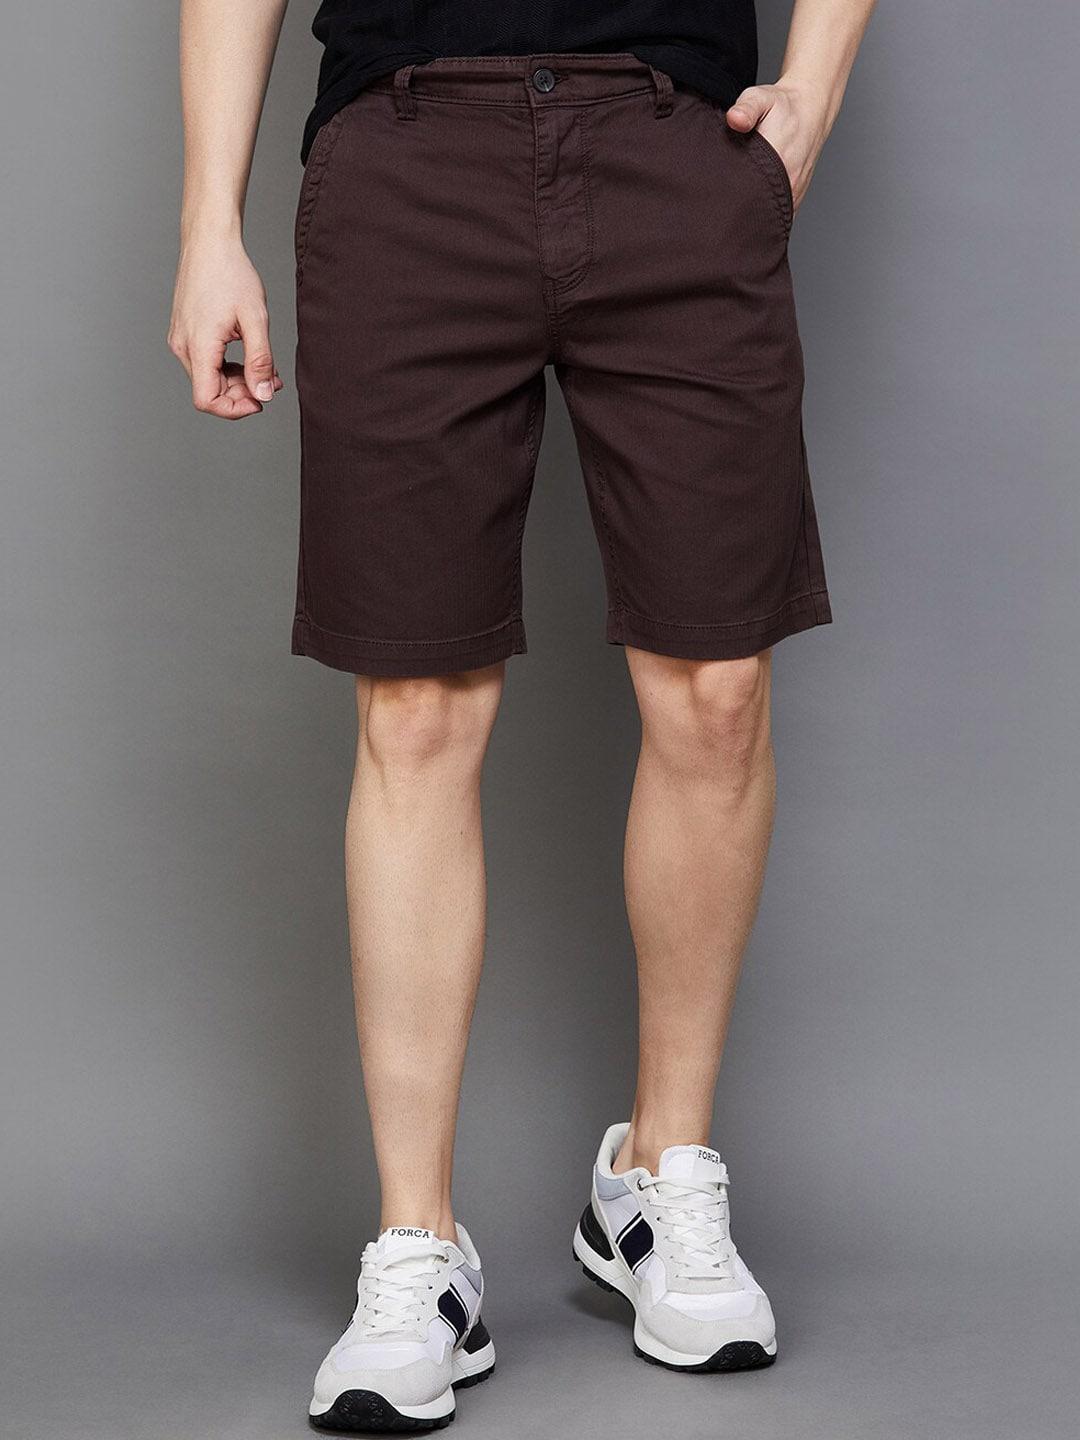 fame-forever-by-lifestyle-men-mid-rise-cotton-regular-shorts